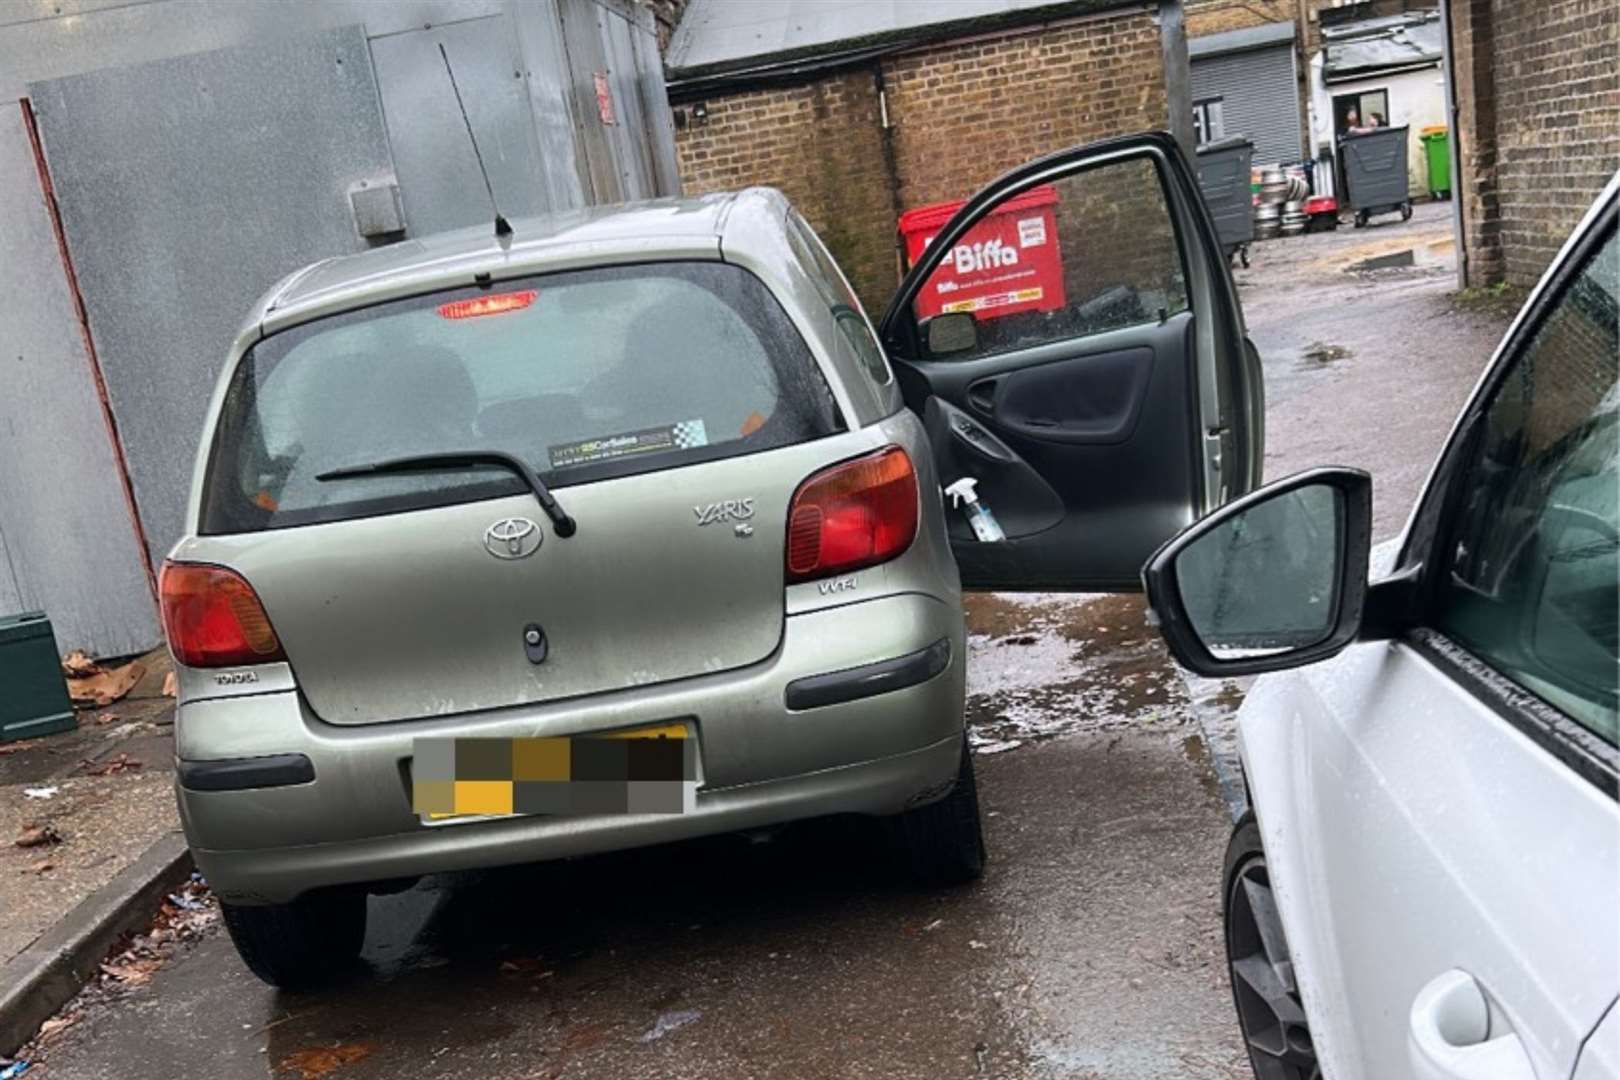 The Toyota Yaris was pulled over in Dartford after being spotted with faulty brake lights. Photo: Kent Police RPU